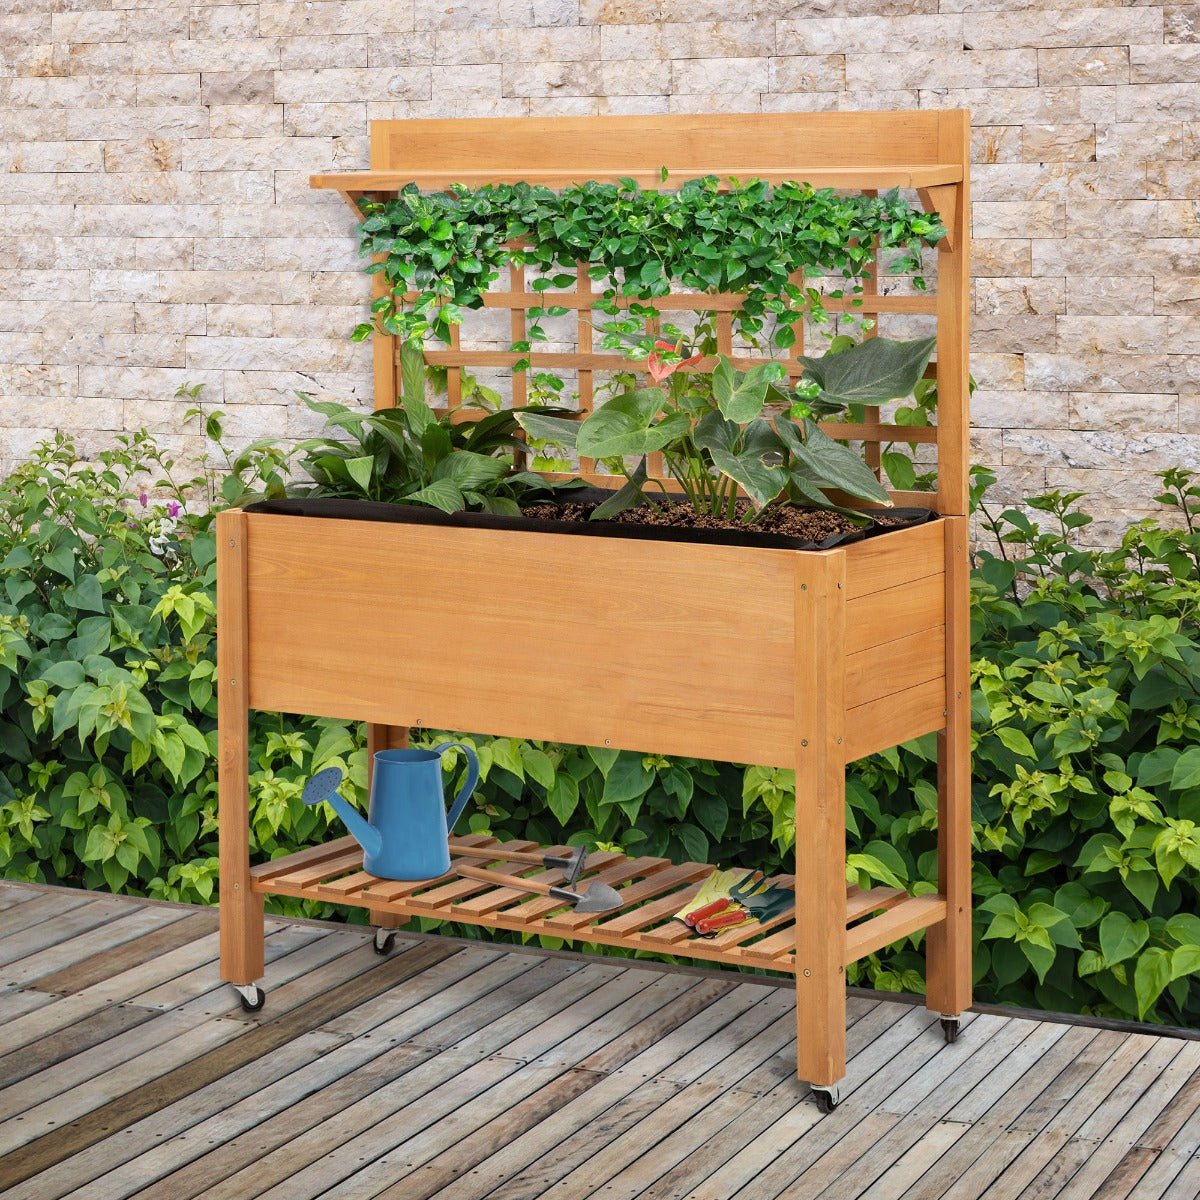 Garden Raised Bed Elevated Wooden Planter with Shelf and Wheels Flower Herb Boxes for Vegetables Flower Solid Wood Brown